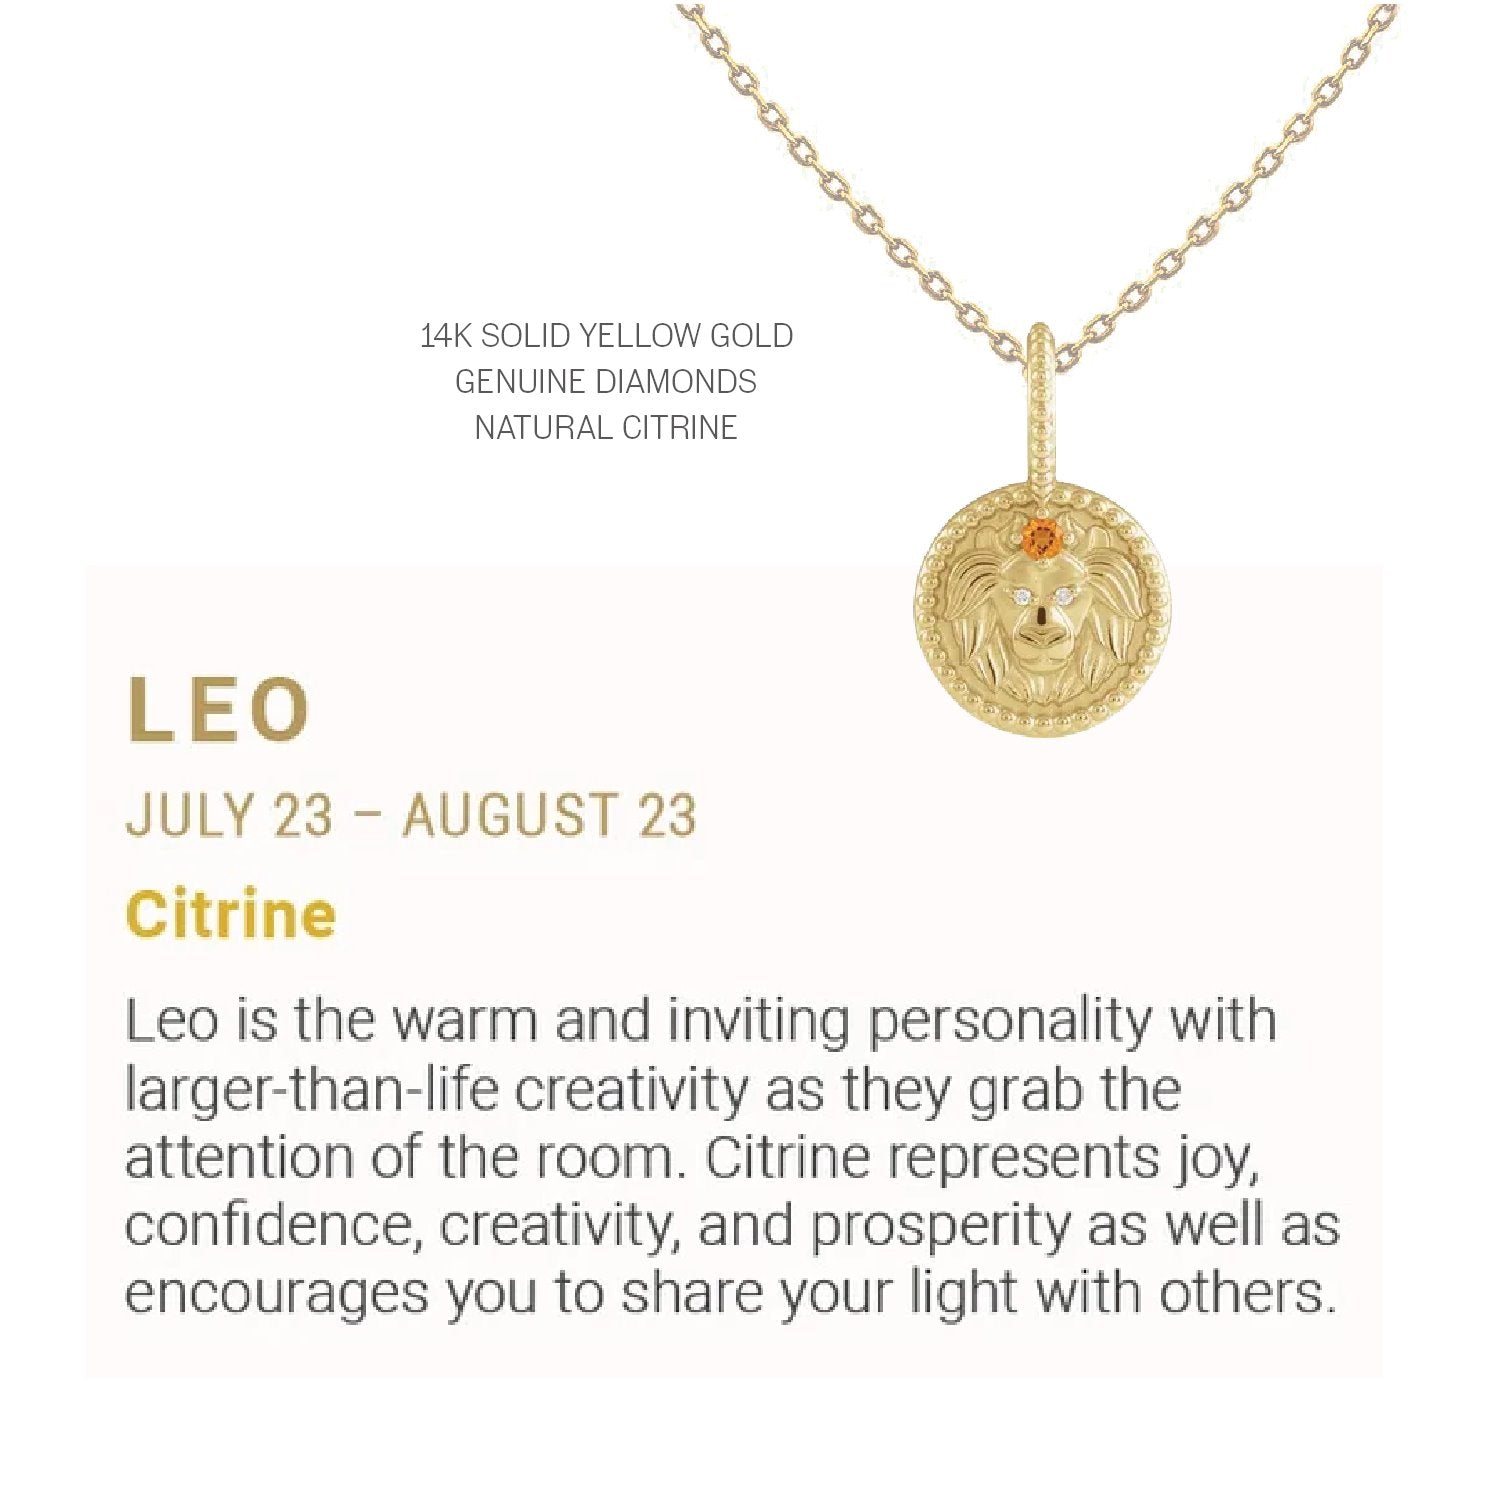 Zodiac Charm Necklace in 14K Gold with Diamonds Necklace Robyn Canady 14K Solid Gold 16" Leo